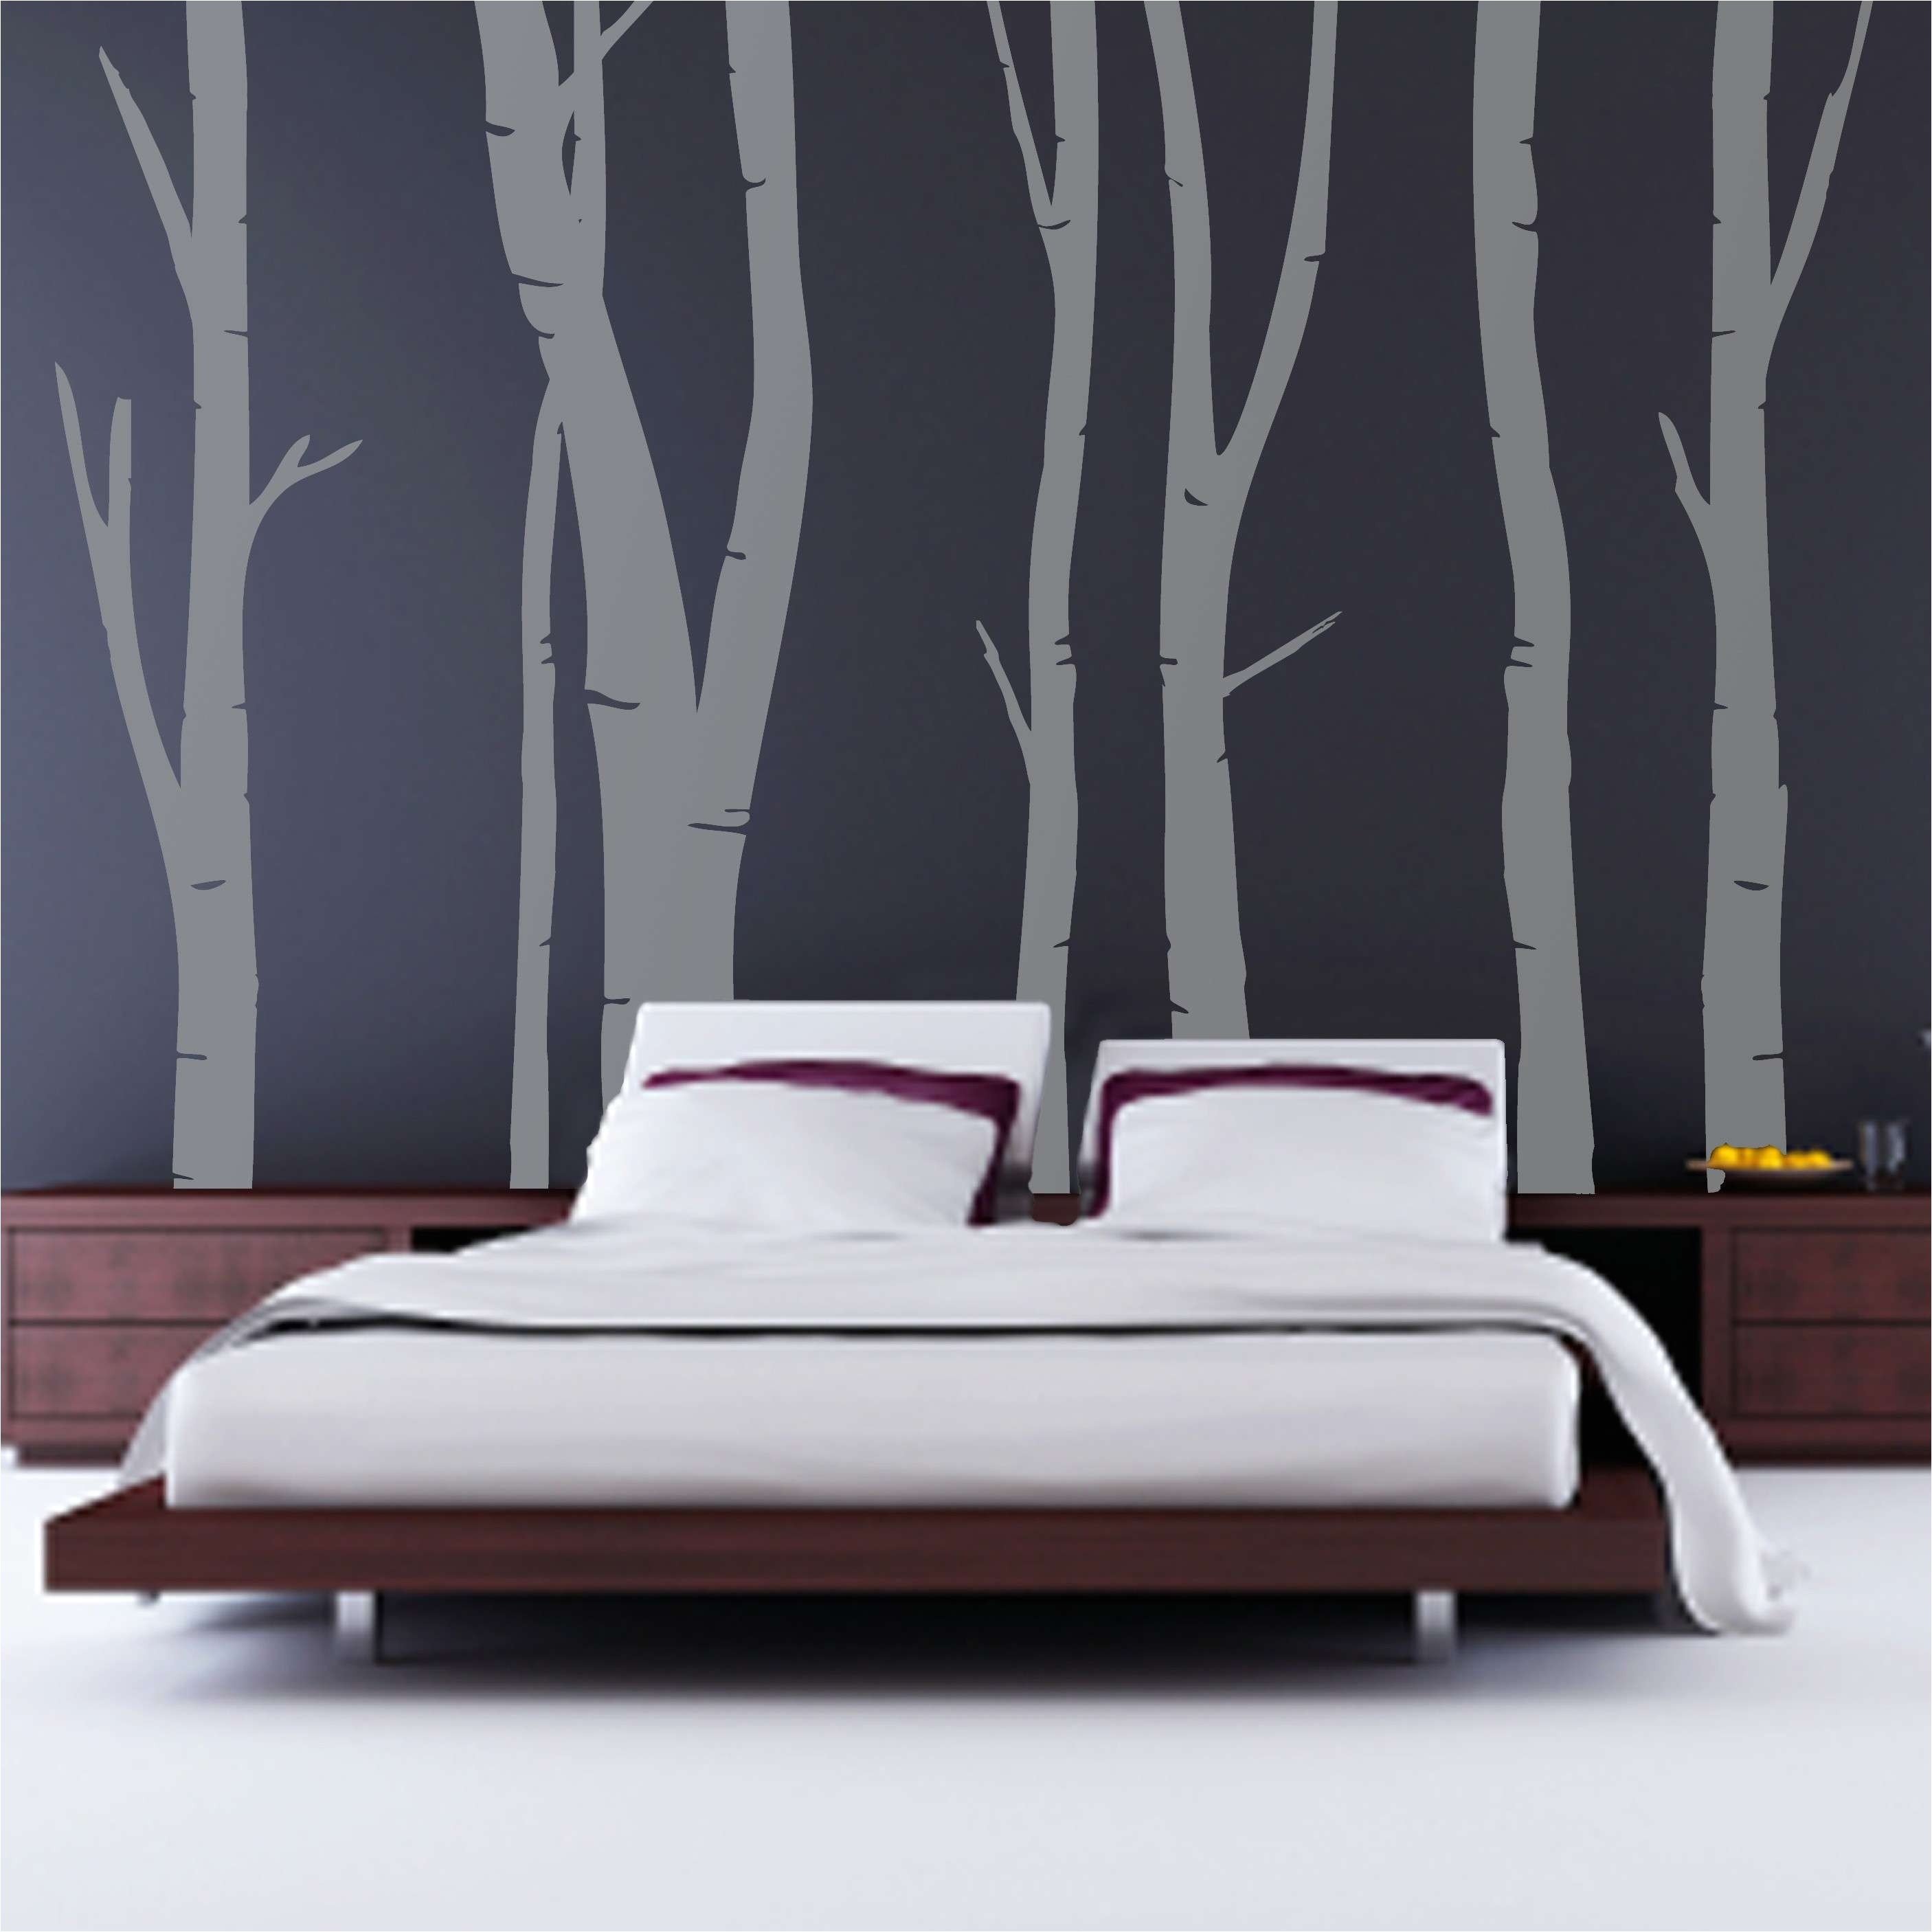 kids bedroom decorating ideas lovely wall decals for bedroom unique 1 kirkland wall decor home design 0d